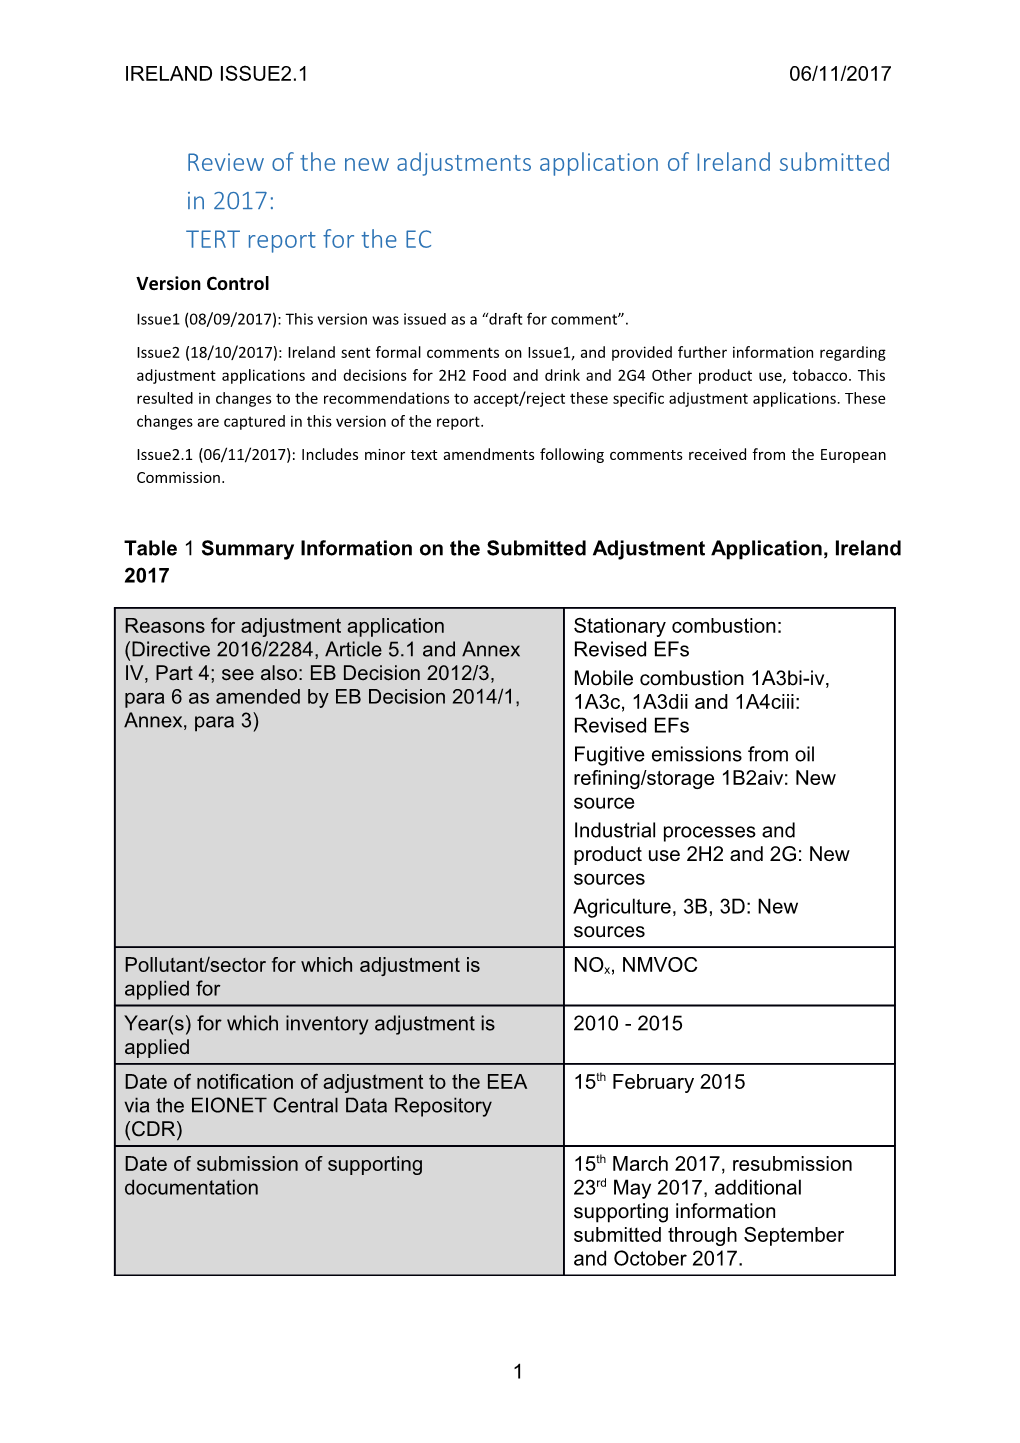 Reviewofthe New Adjustments Applicationofireland Submitted in 2017:TERT Report for the EC